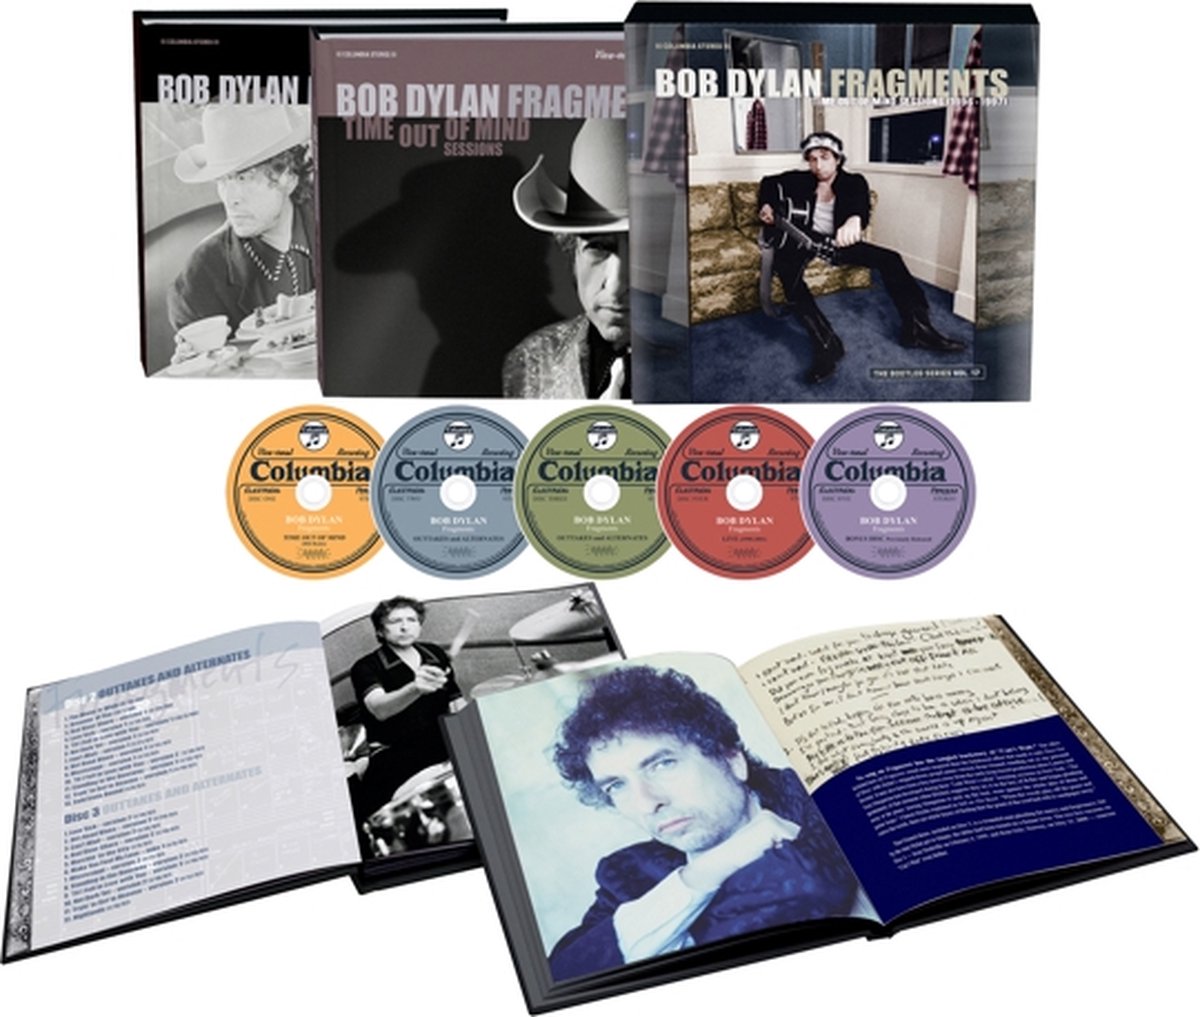 DYLAN BOB - Fragments - Time Out Of Mind Sessions 1996-1997: Bootleg Series Vol.17